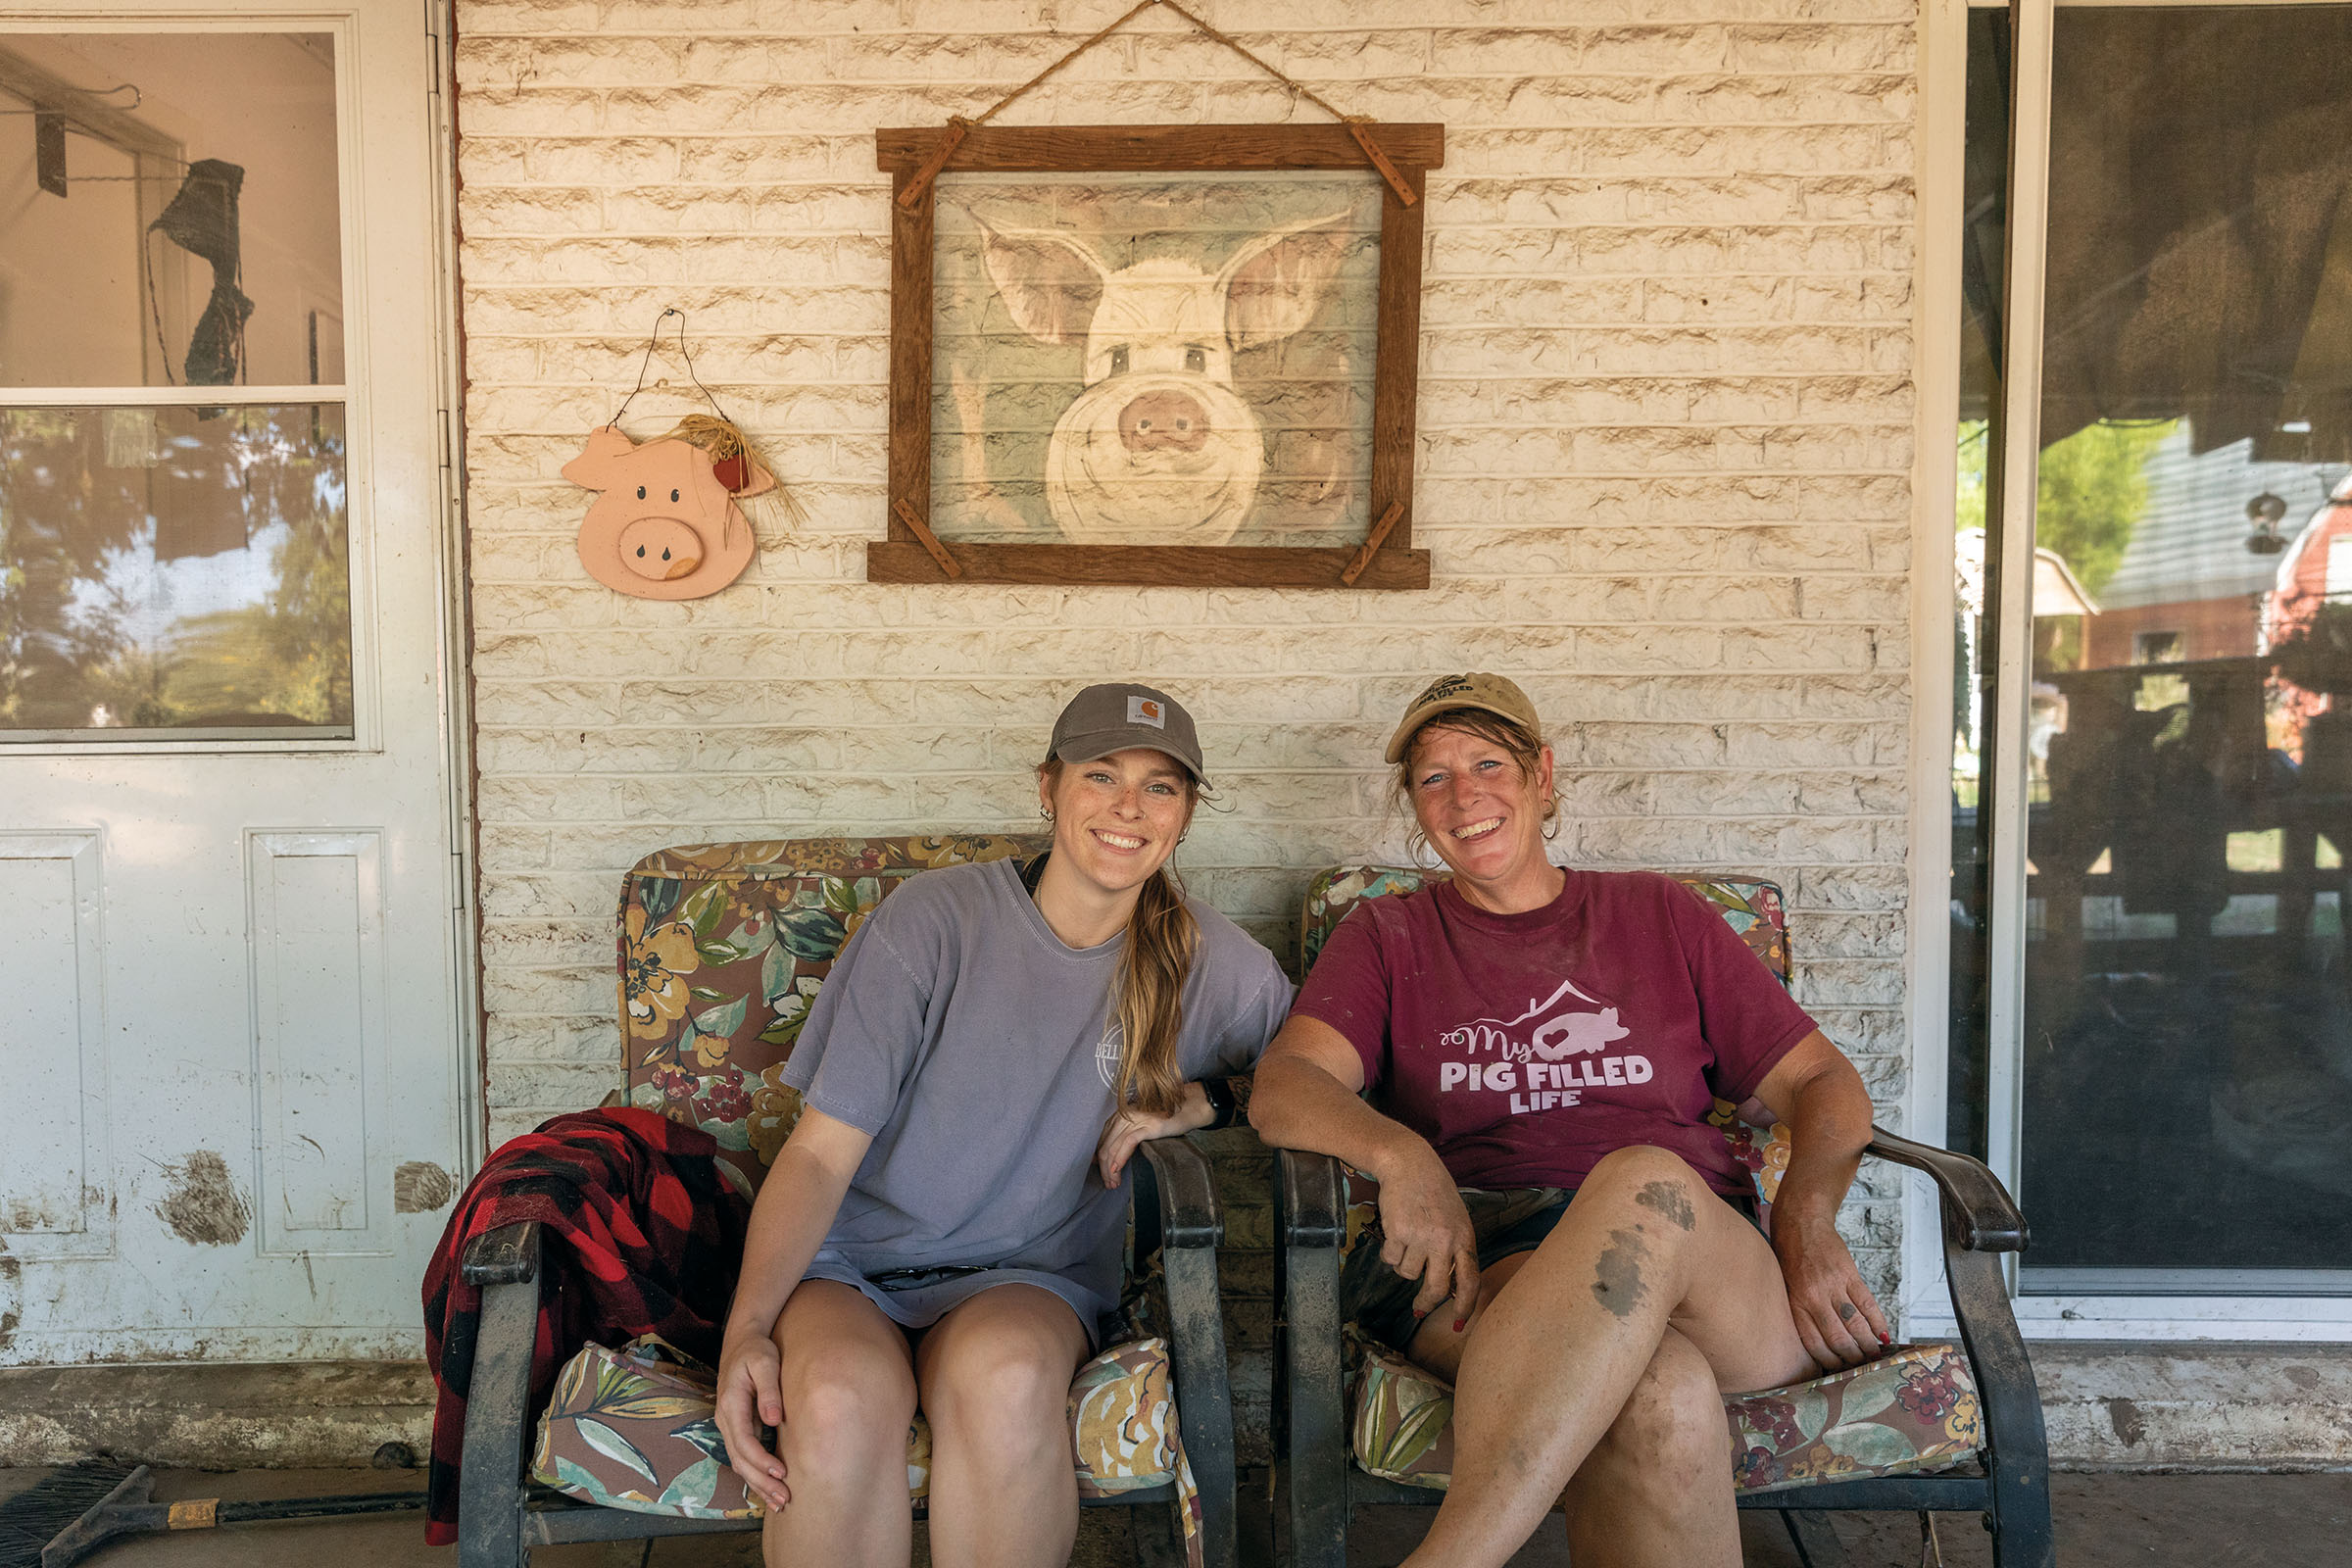 Two people sit on an outdoor couch underneath a framed art print of a pig